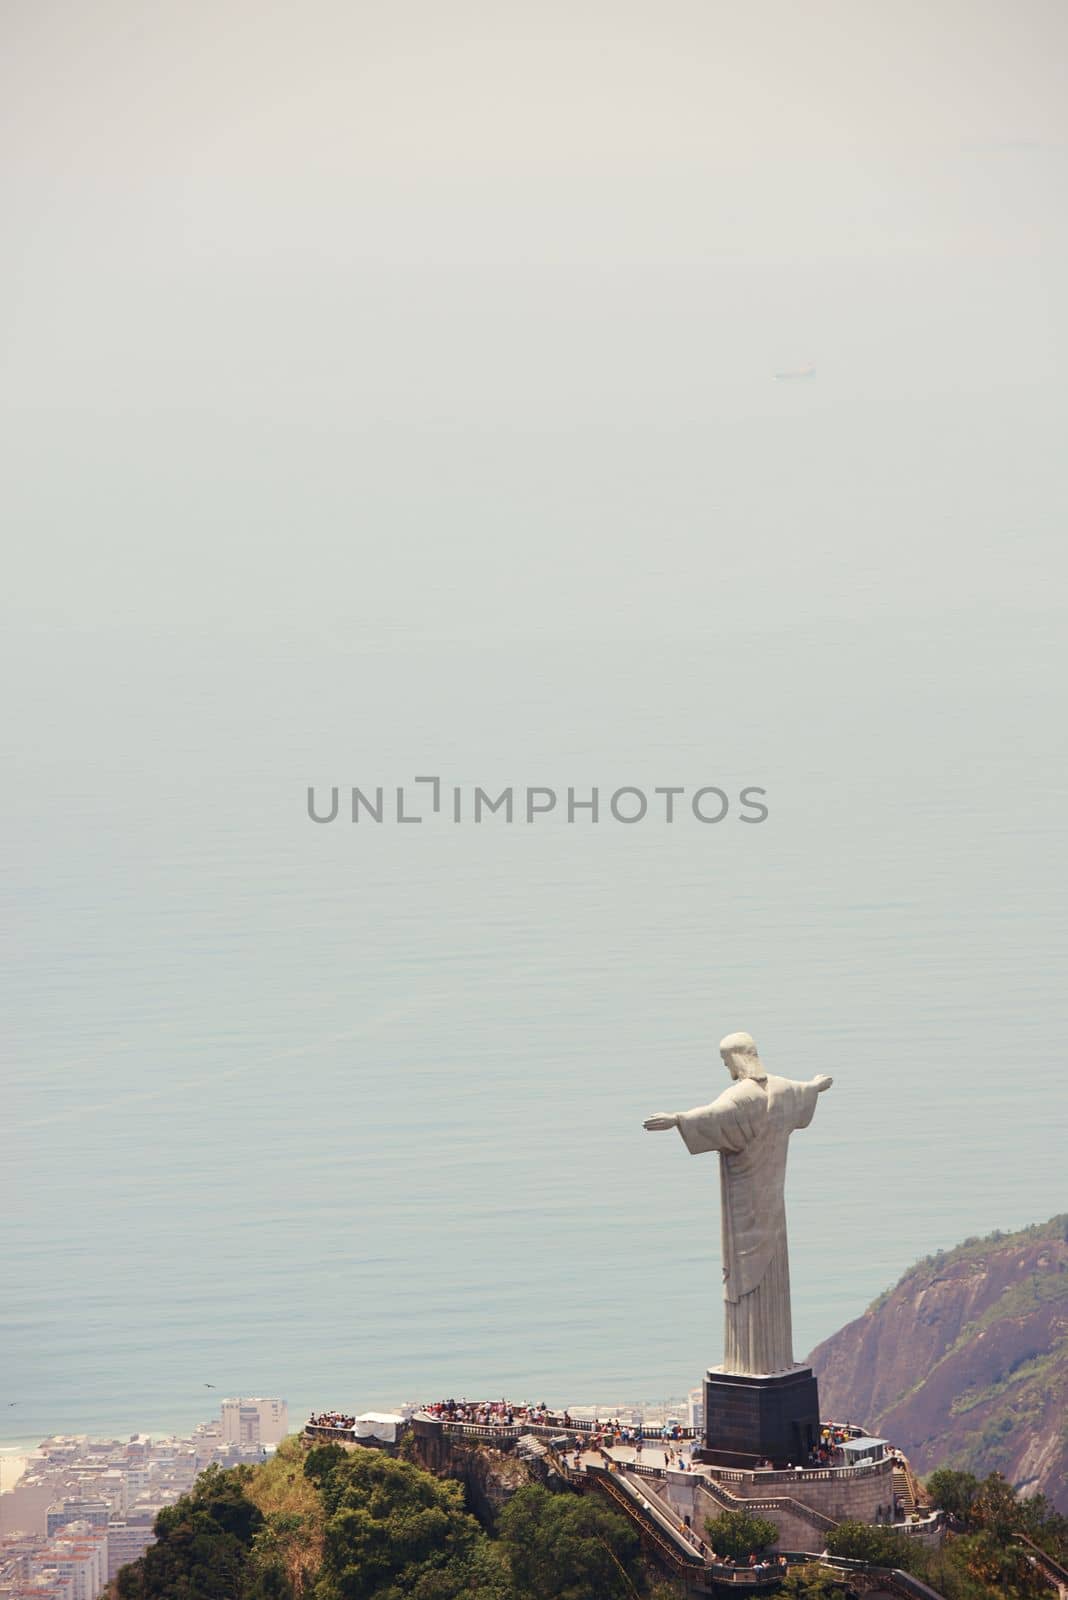 It is the symbol of Brazilian Christianity. the Christ the Redeemer monument in Rio de Janeiro, Brazil. by YuriArcurs